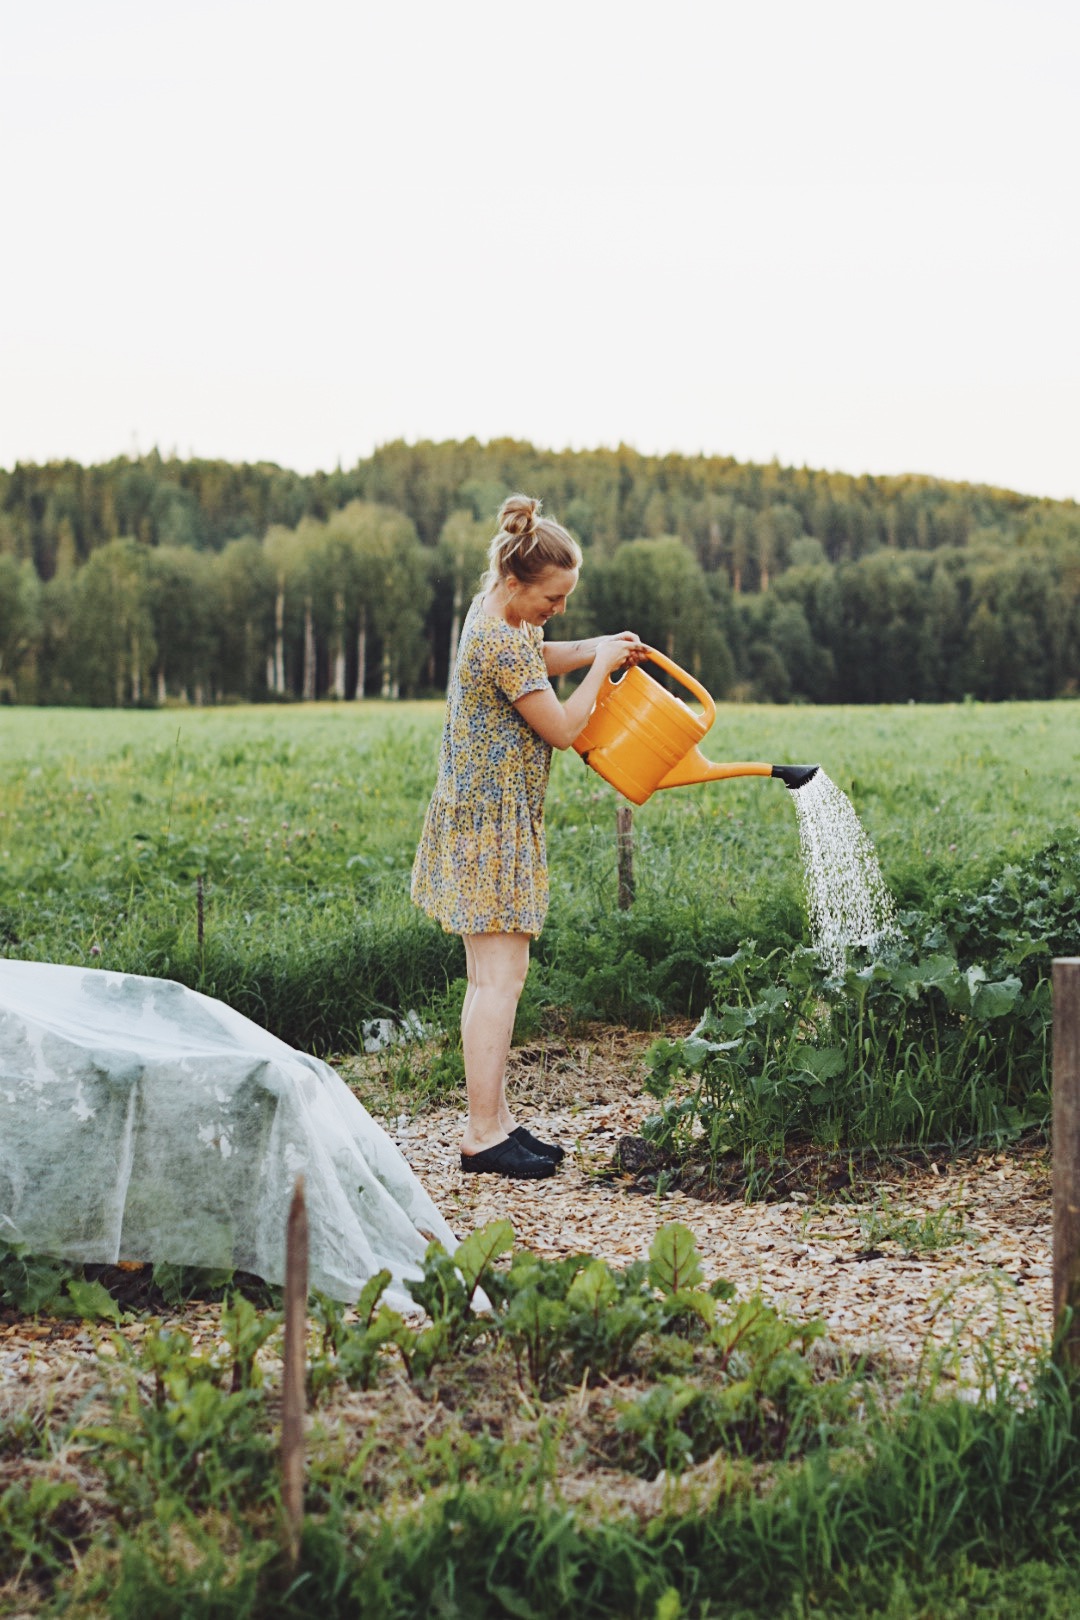 Isabell is watering her crops wearing a summer dress.